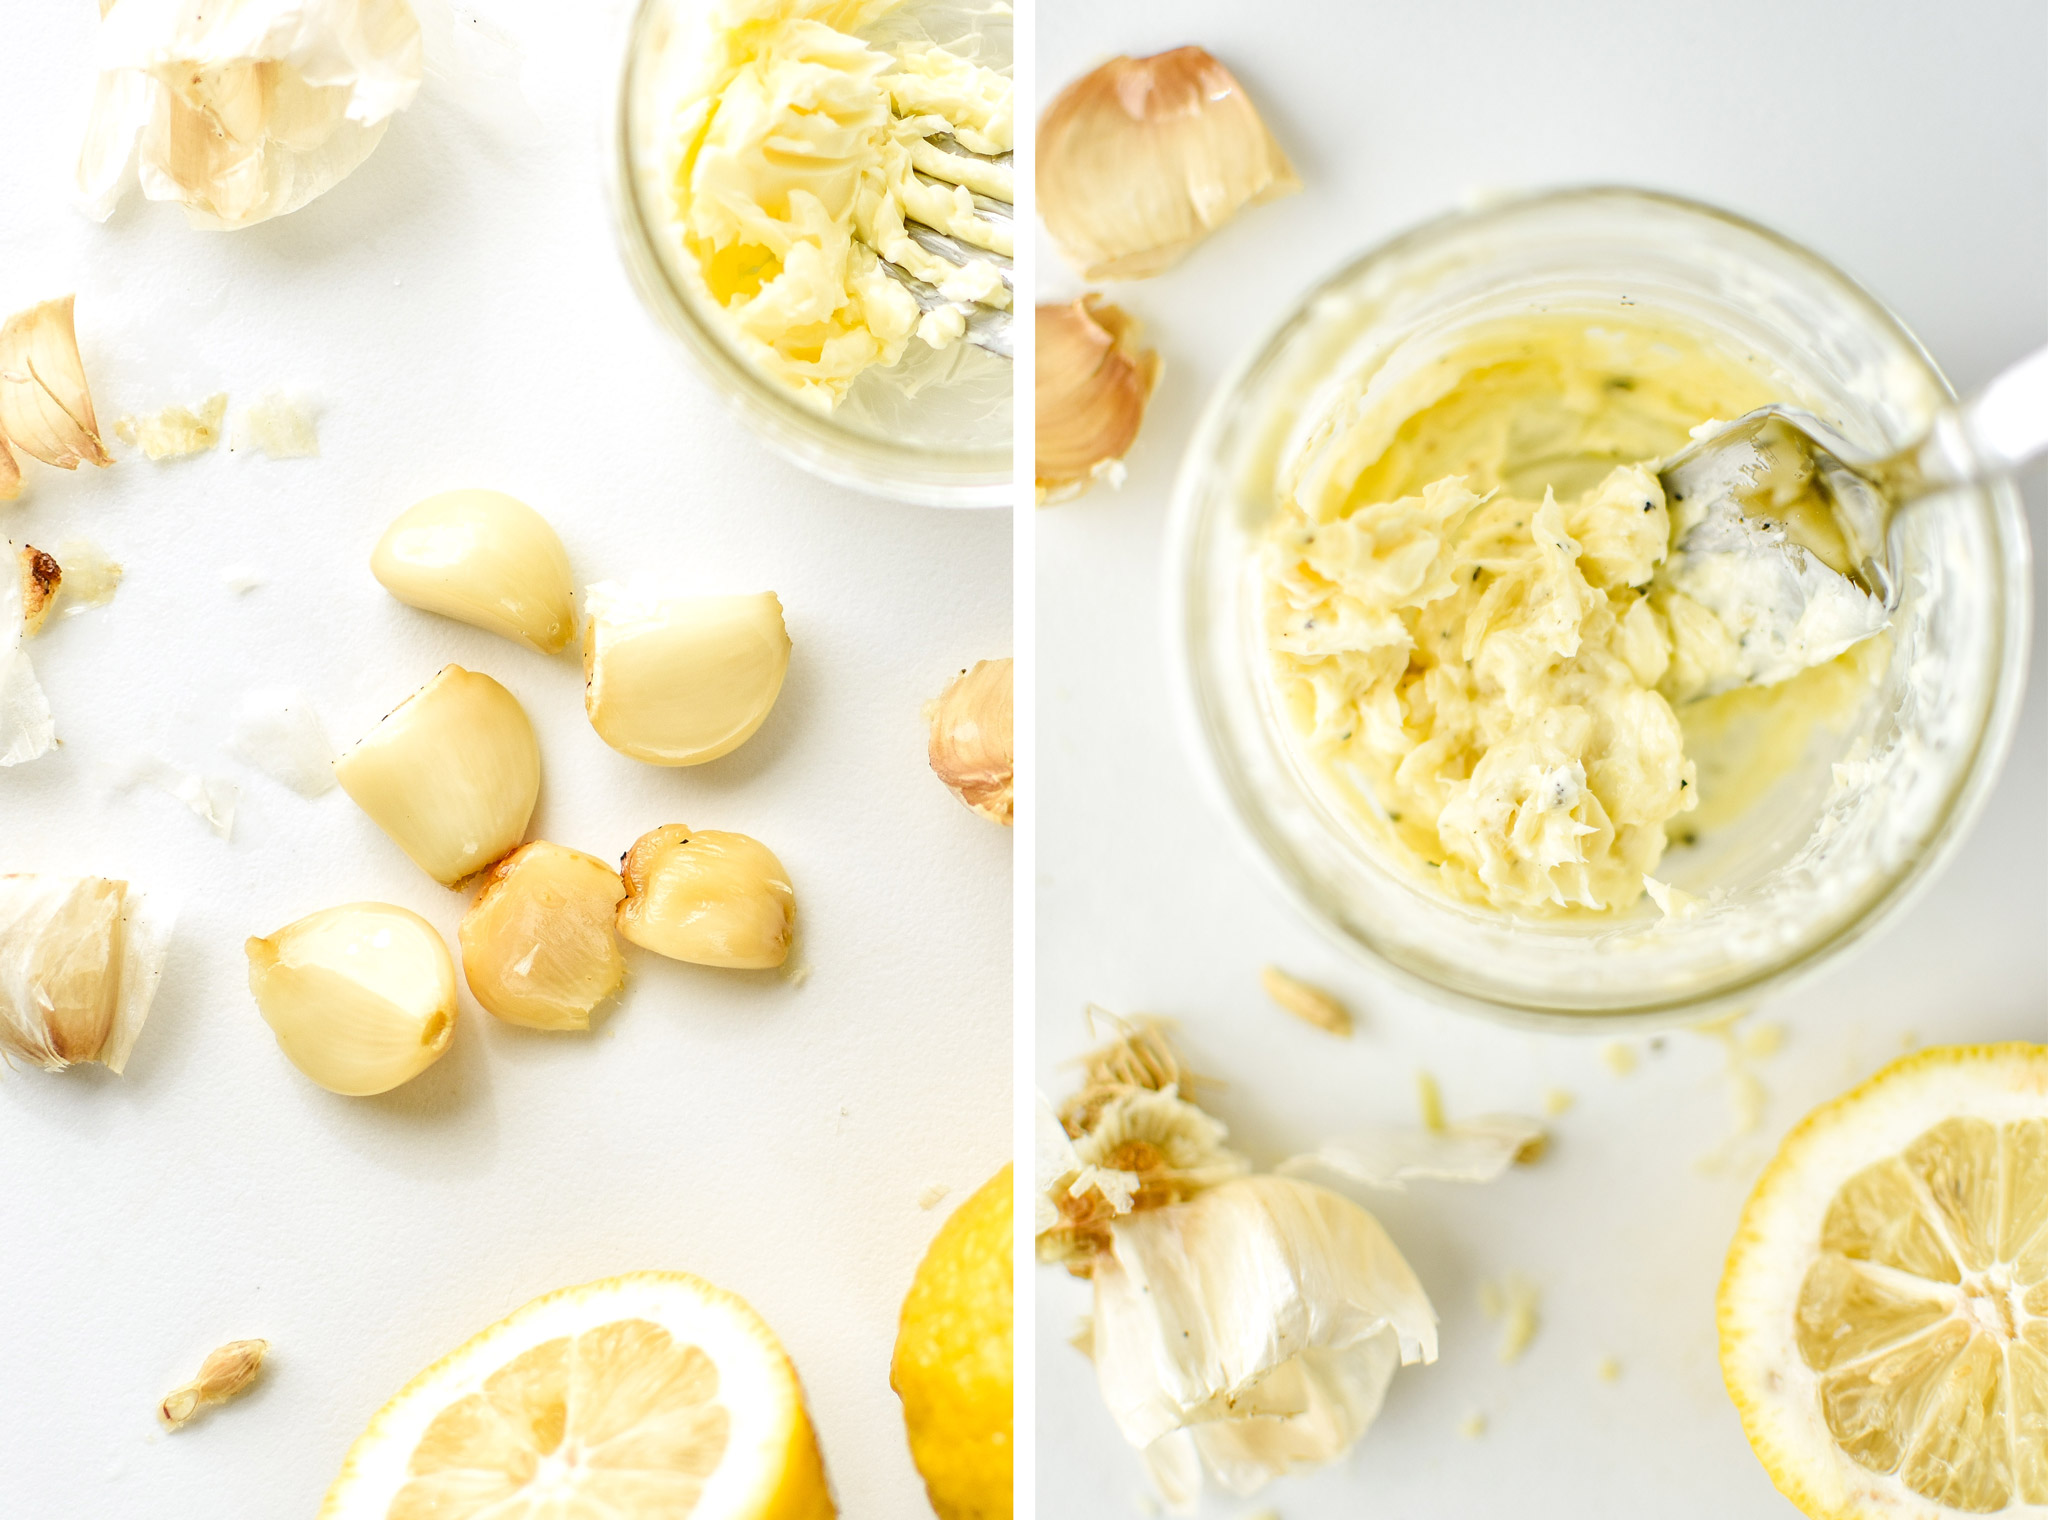 making lemon garlic butter for chicken meatballs two ways meal prep lunches